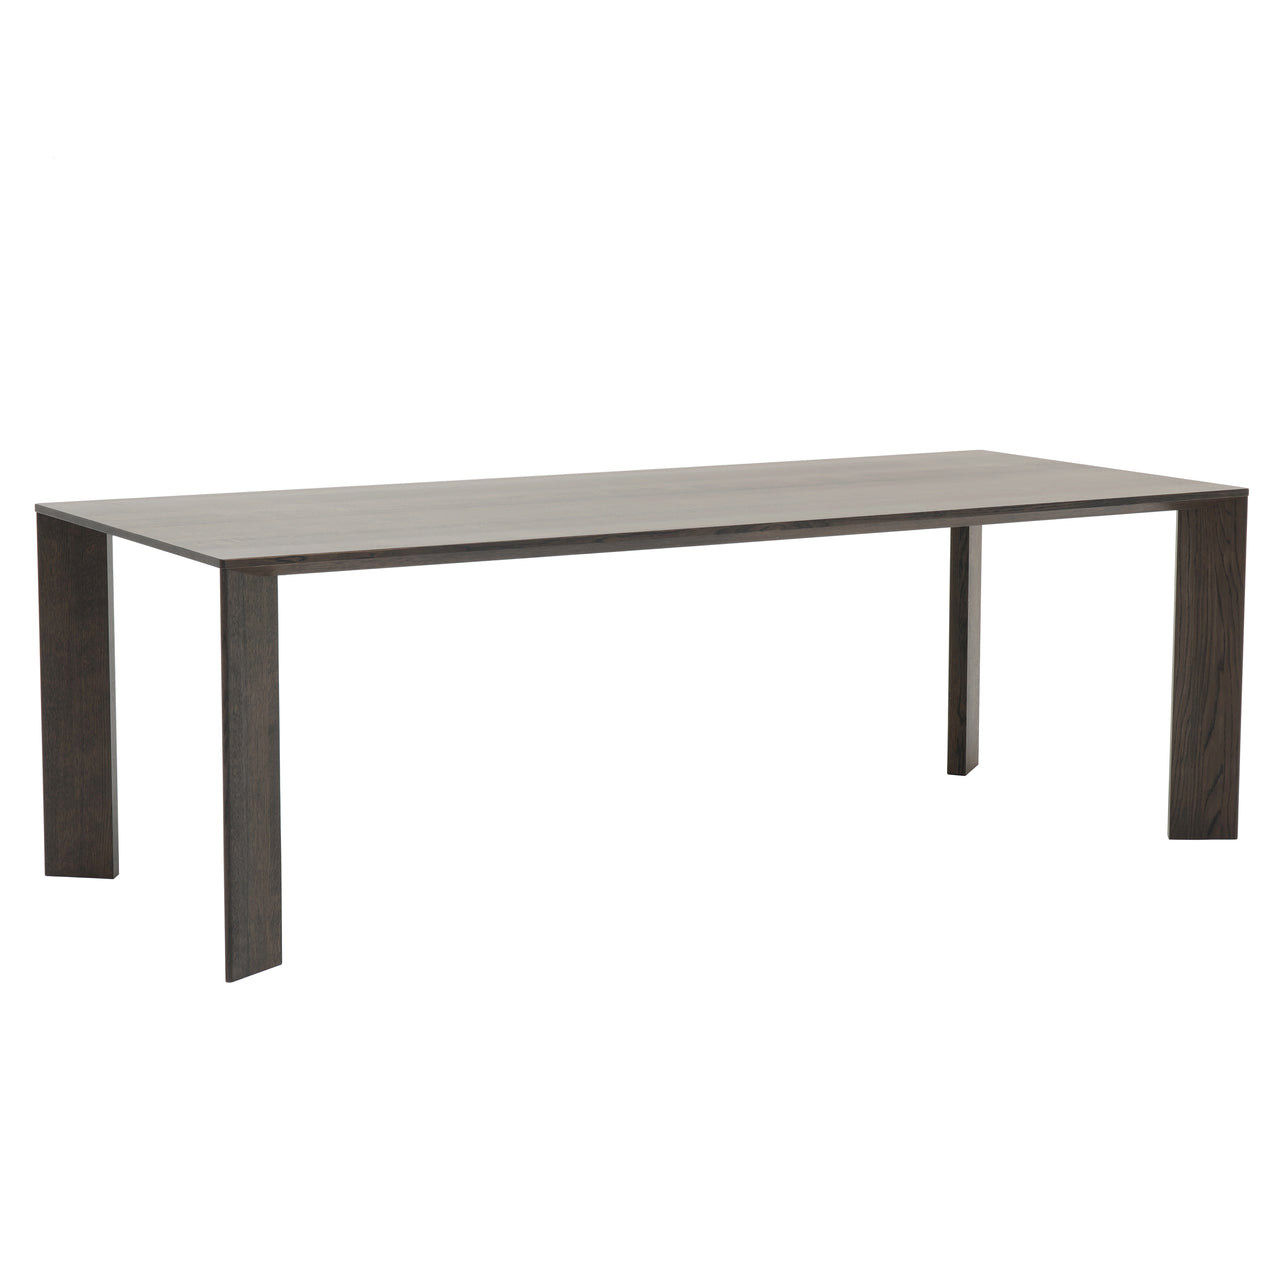 Azabu Residence Dining Table A-DT02 | Buy Karimoku Case online at A+R